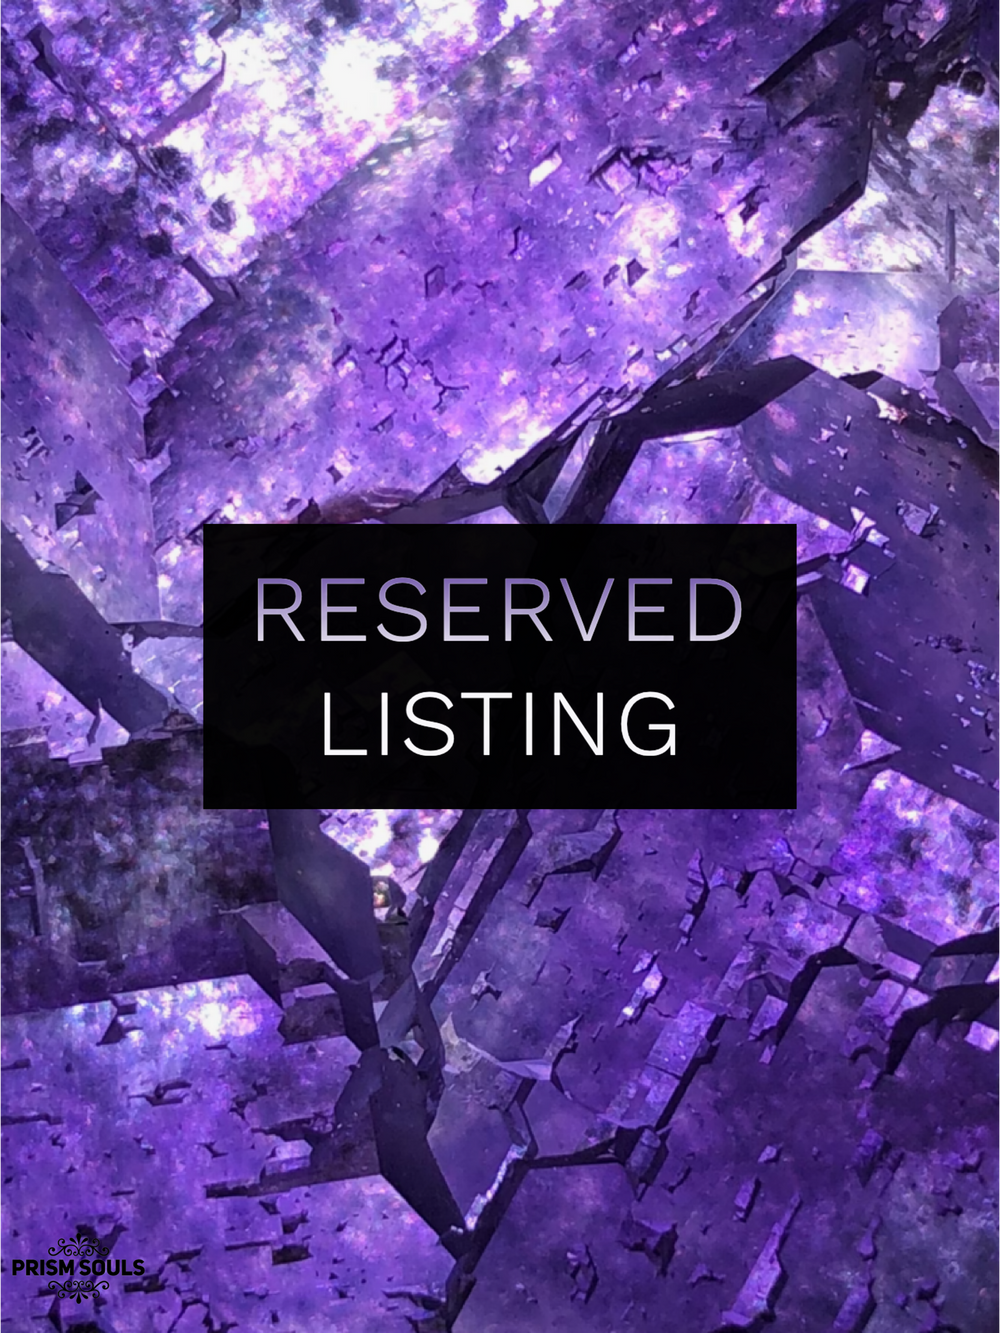 RESERVED LISTING - spiralout1031